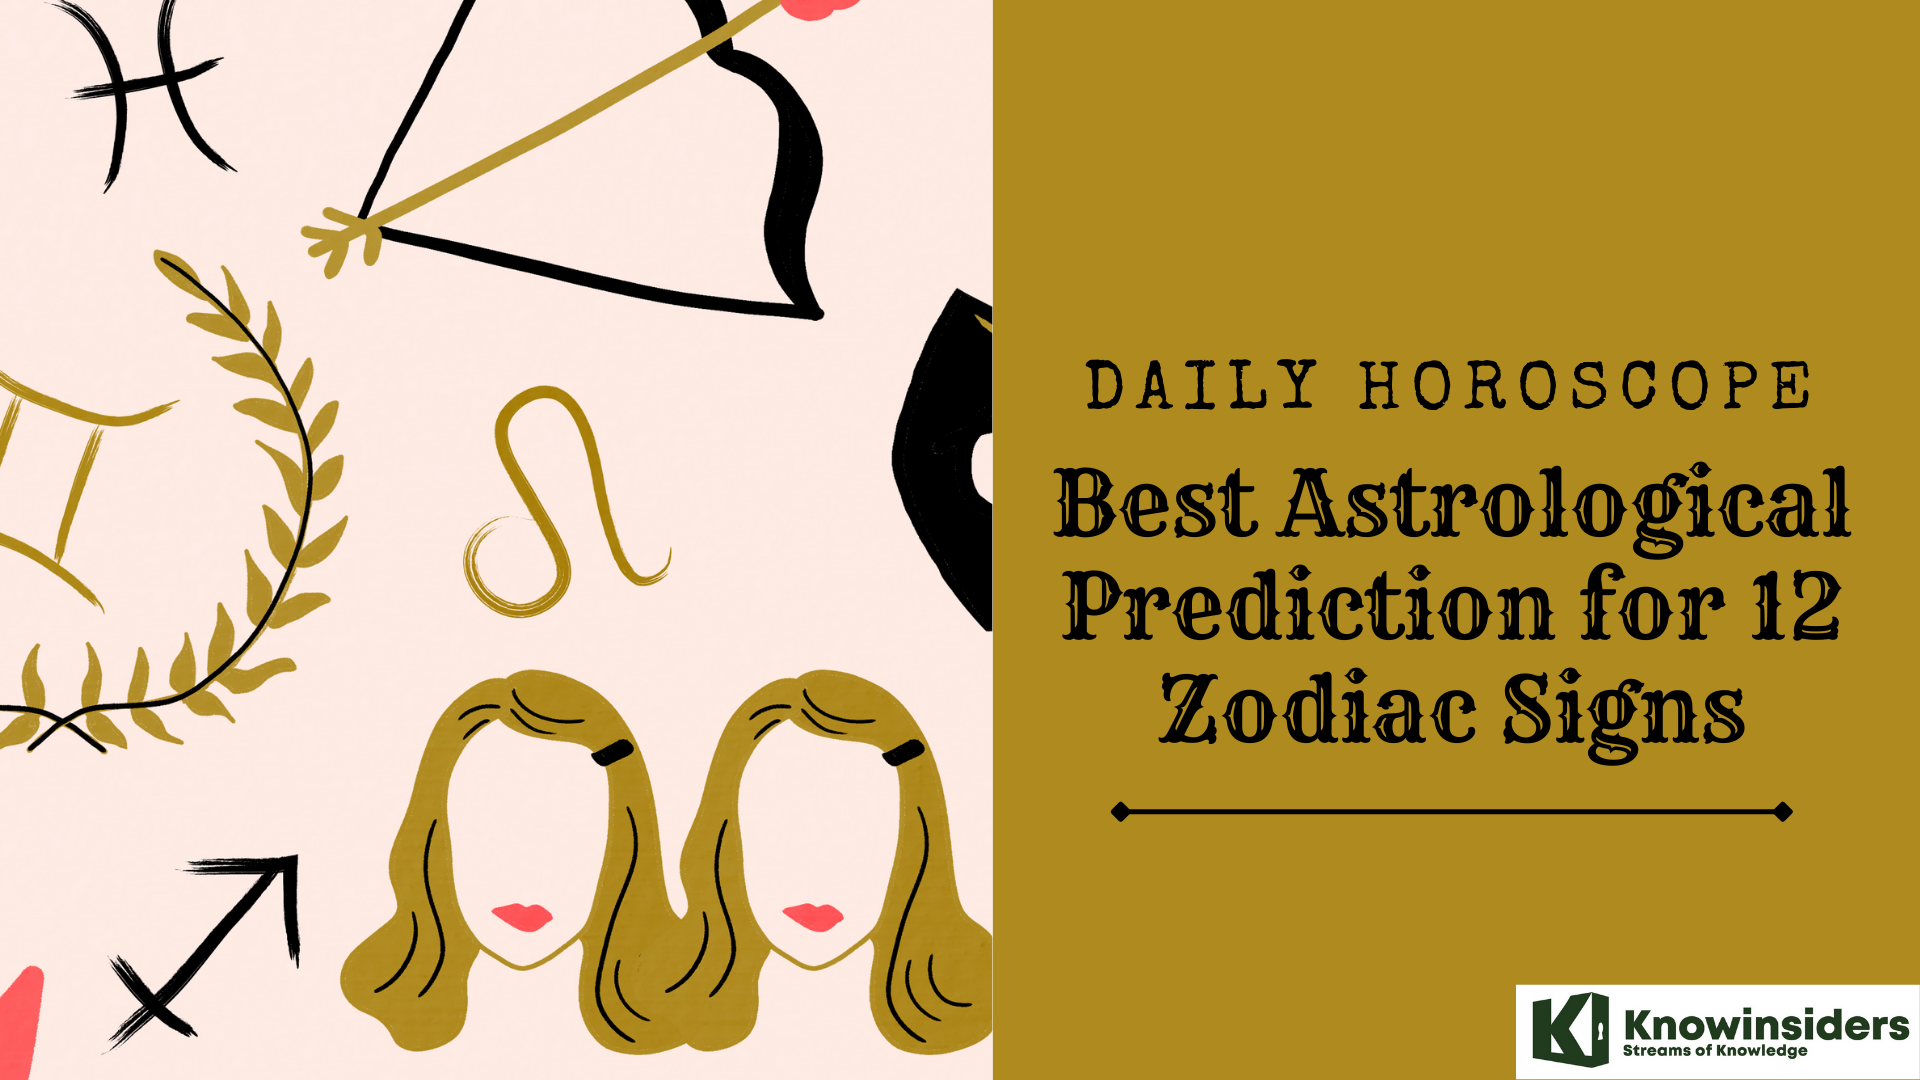 Daily Horoscope (June 5, 2022): Best Astrological Prediction for 12 Zodiac Signs